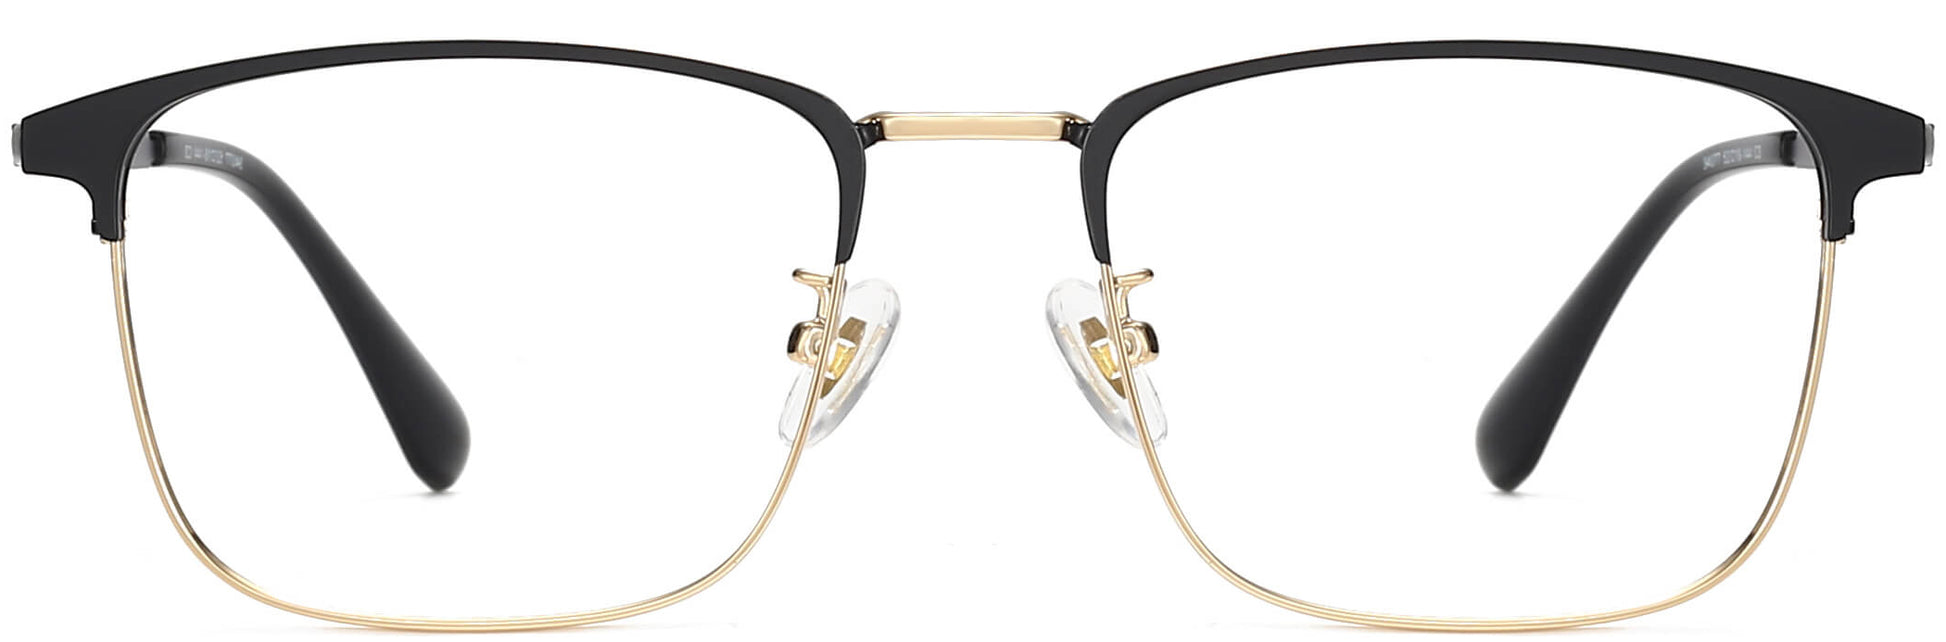 Jimmy Browline Black Eyeglasses from ANRRI, front view